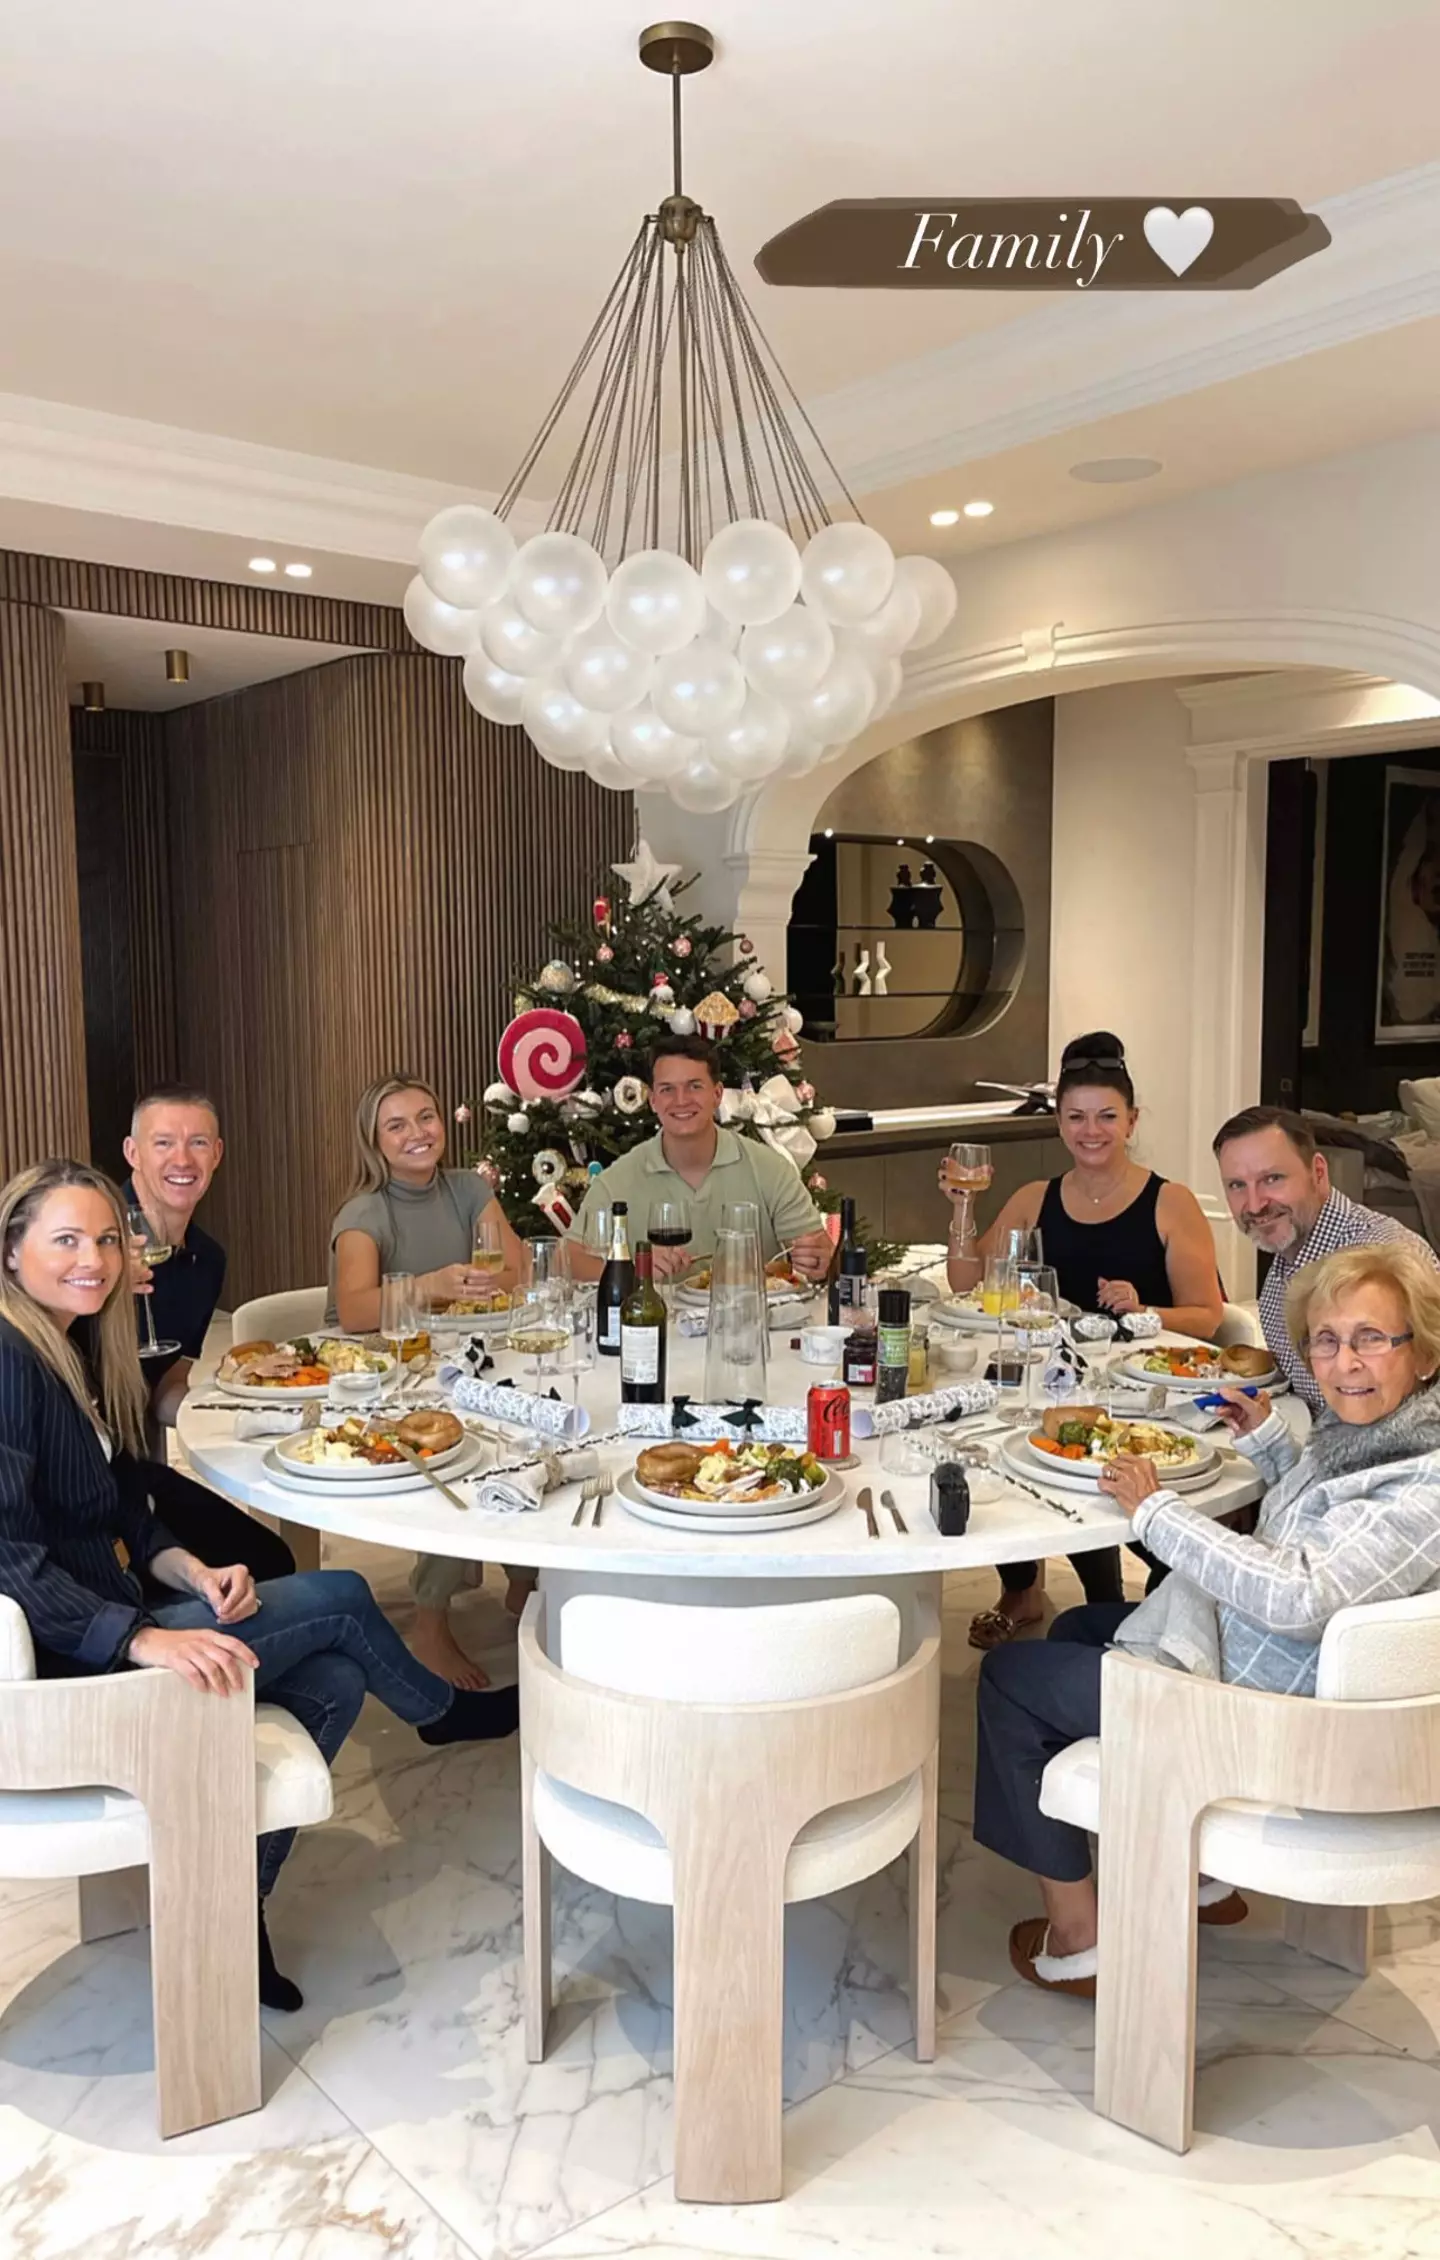 Tommy appeared to be absent in a Christmas Day picture.